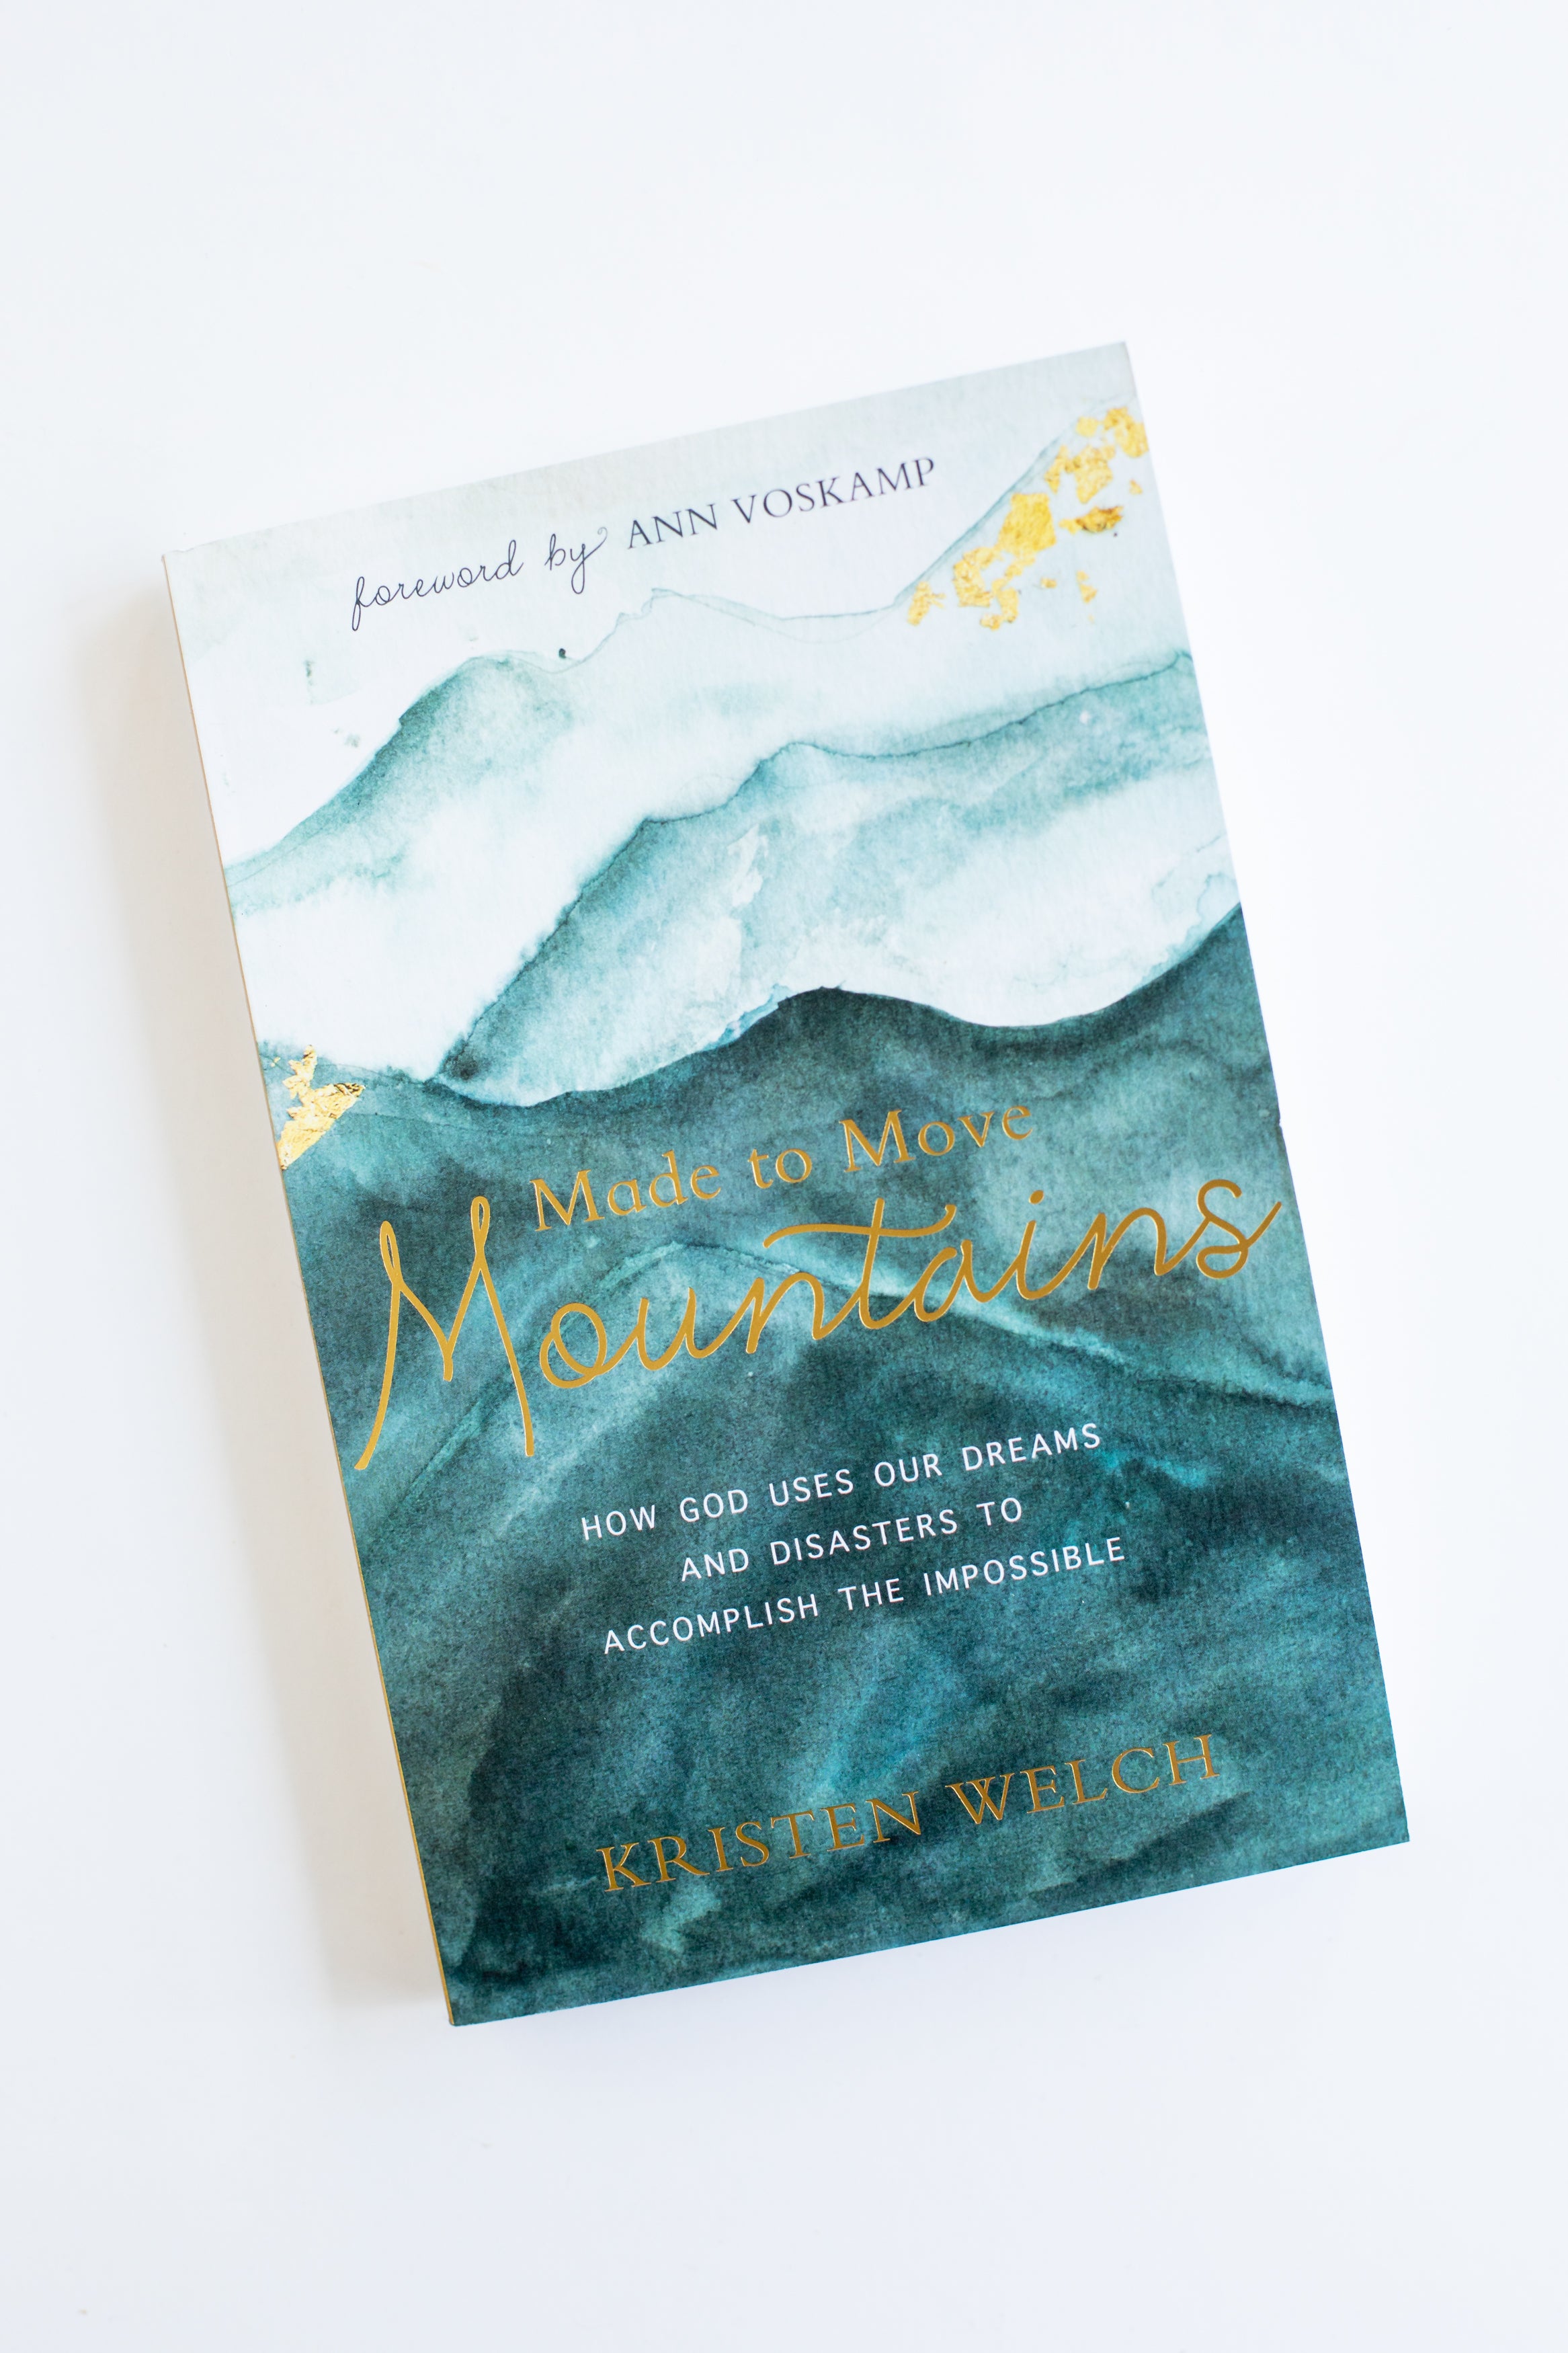 Made to Move Mountains by Kristen Welch | Autographed Copy Book - Fair Trade - Mercy House Global